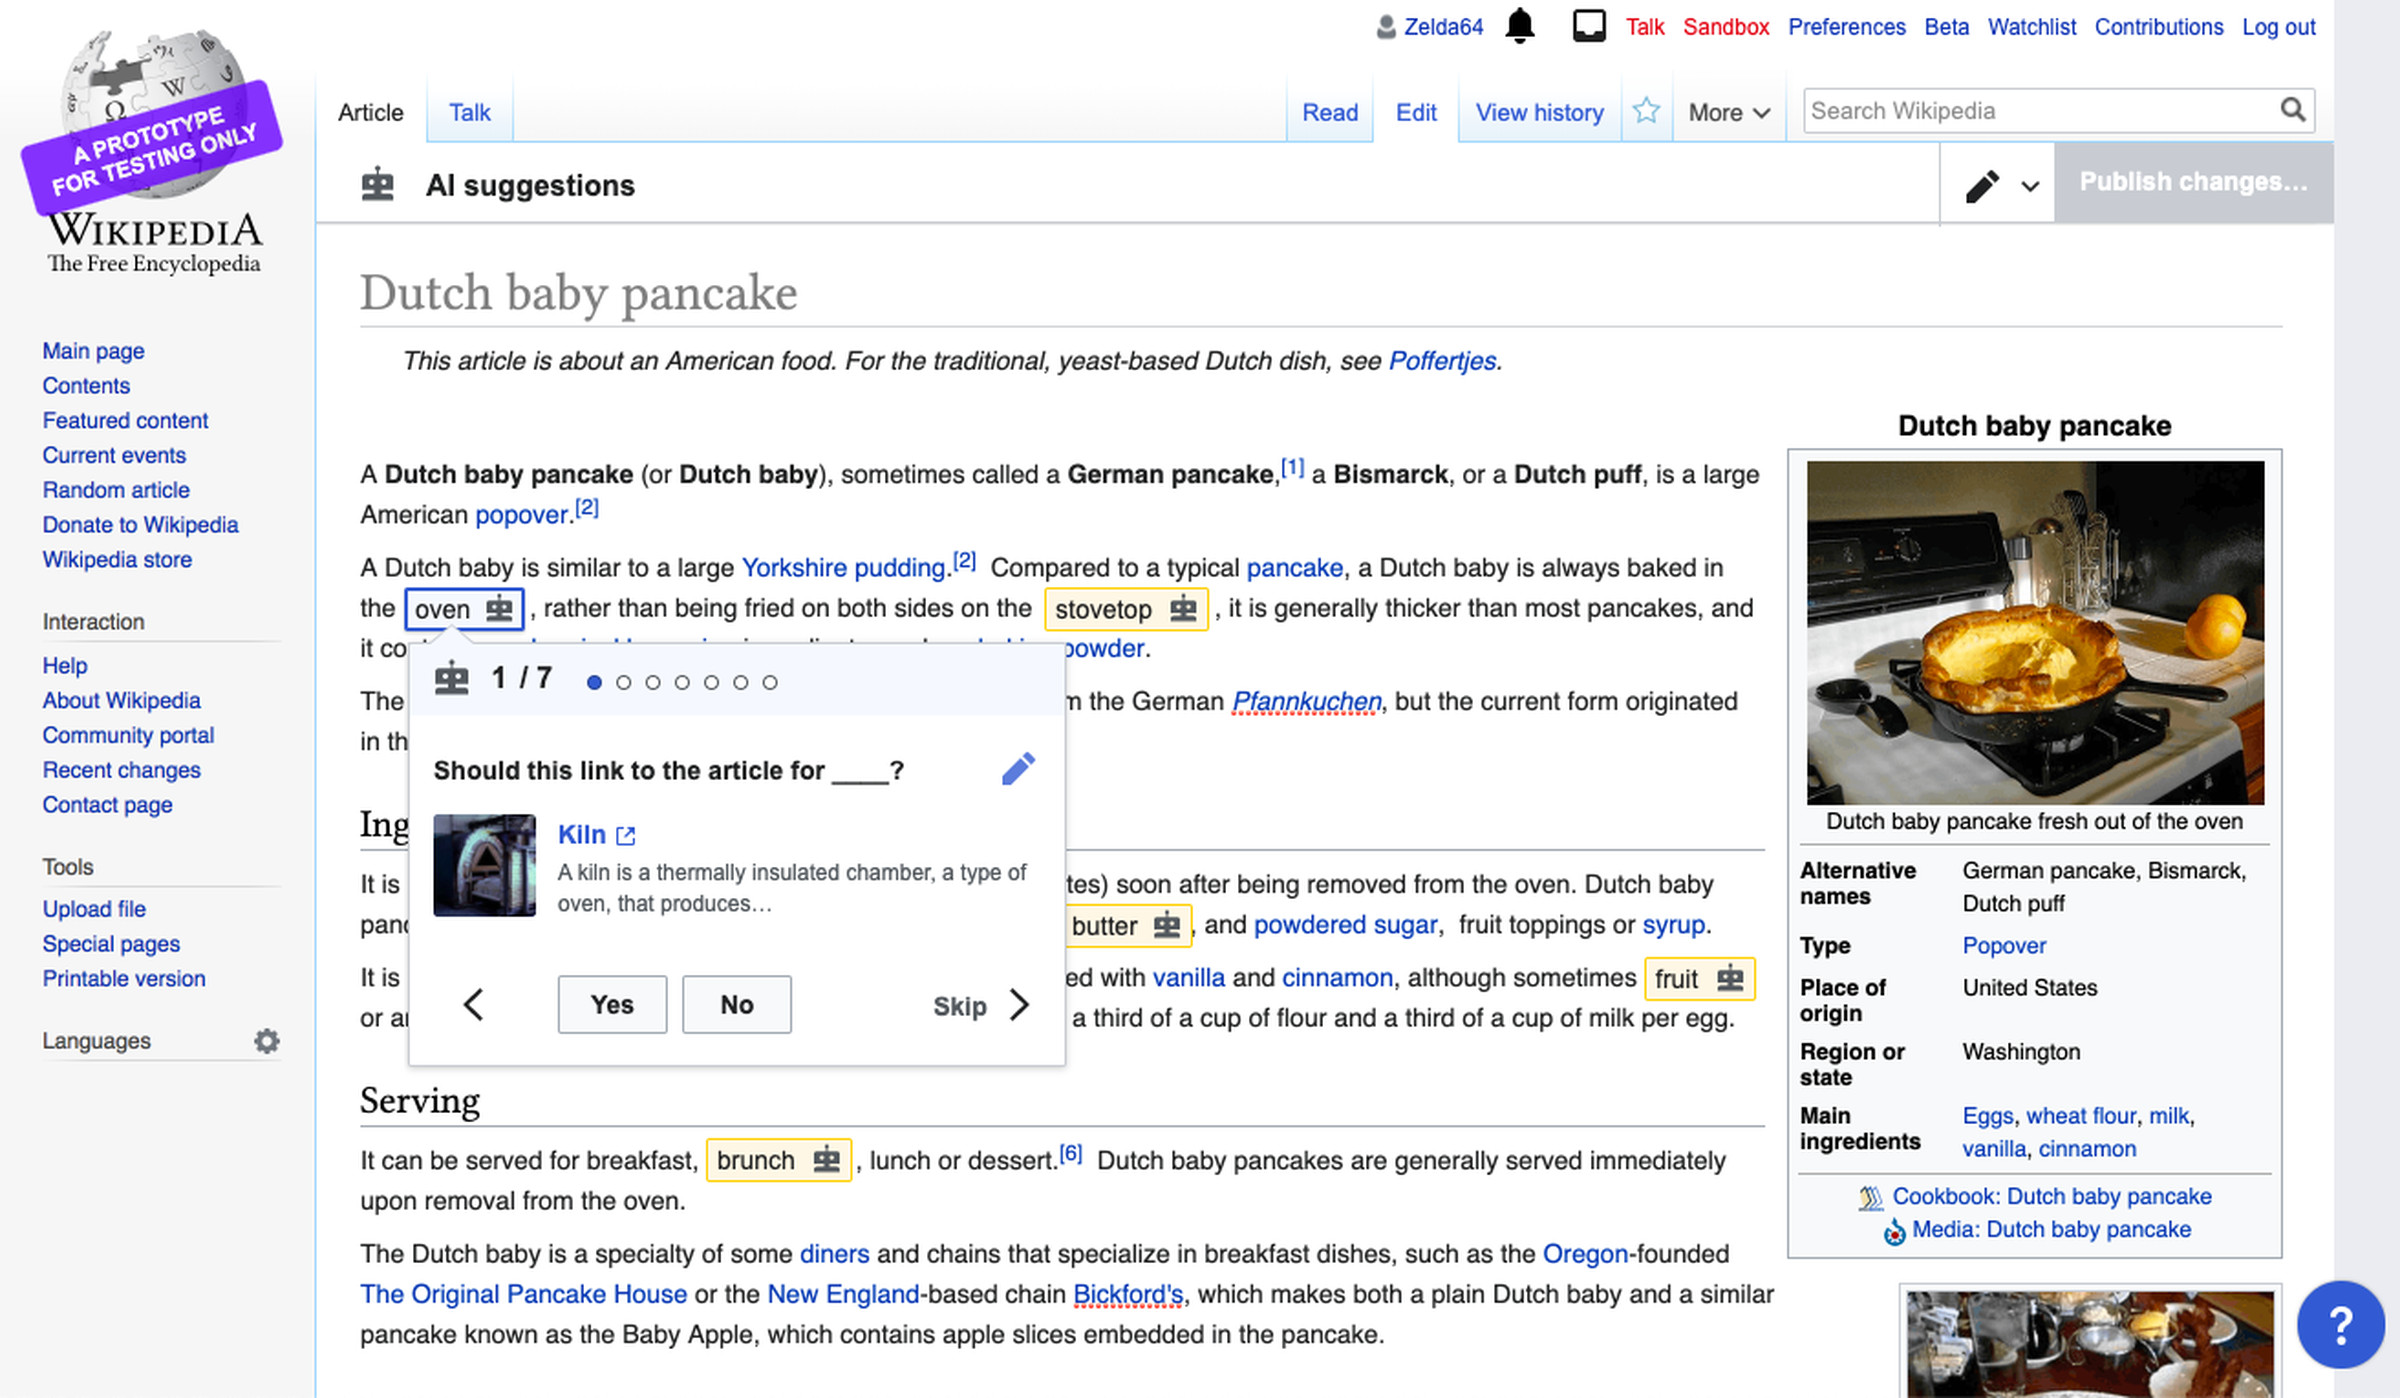 A structured task suggestion on a Wikipedia page for Dutch baby pancake.